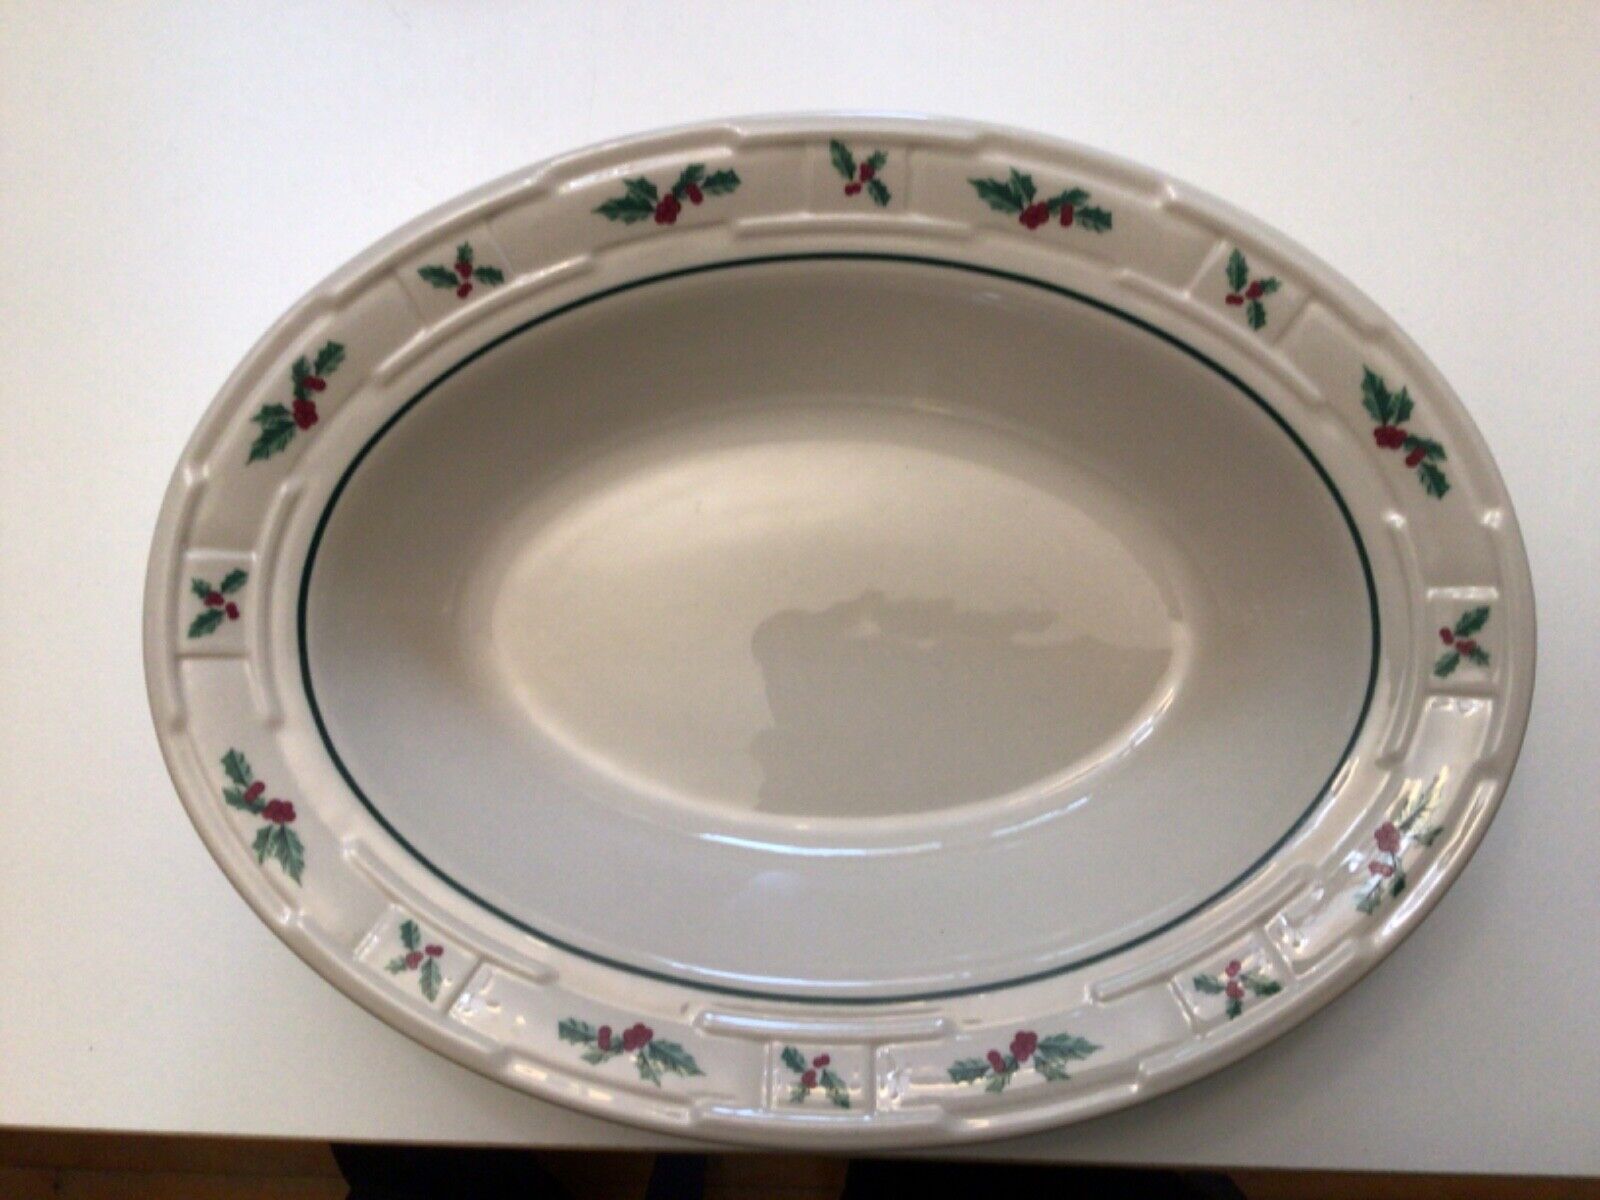 Longaberger Pottery Large Serving Bowl Holly Berry 11 x 8.5 x 2.5